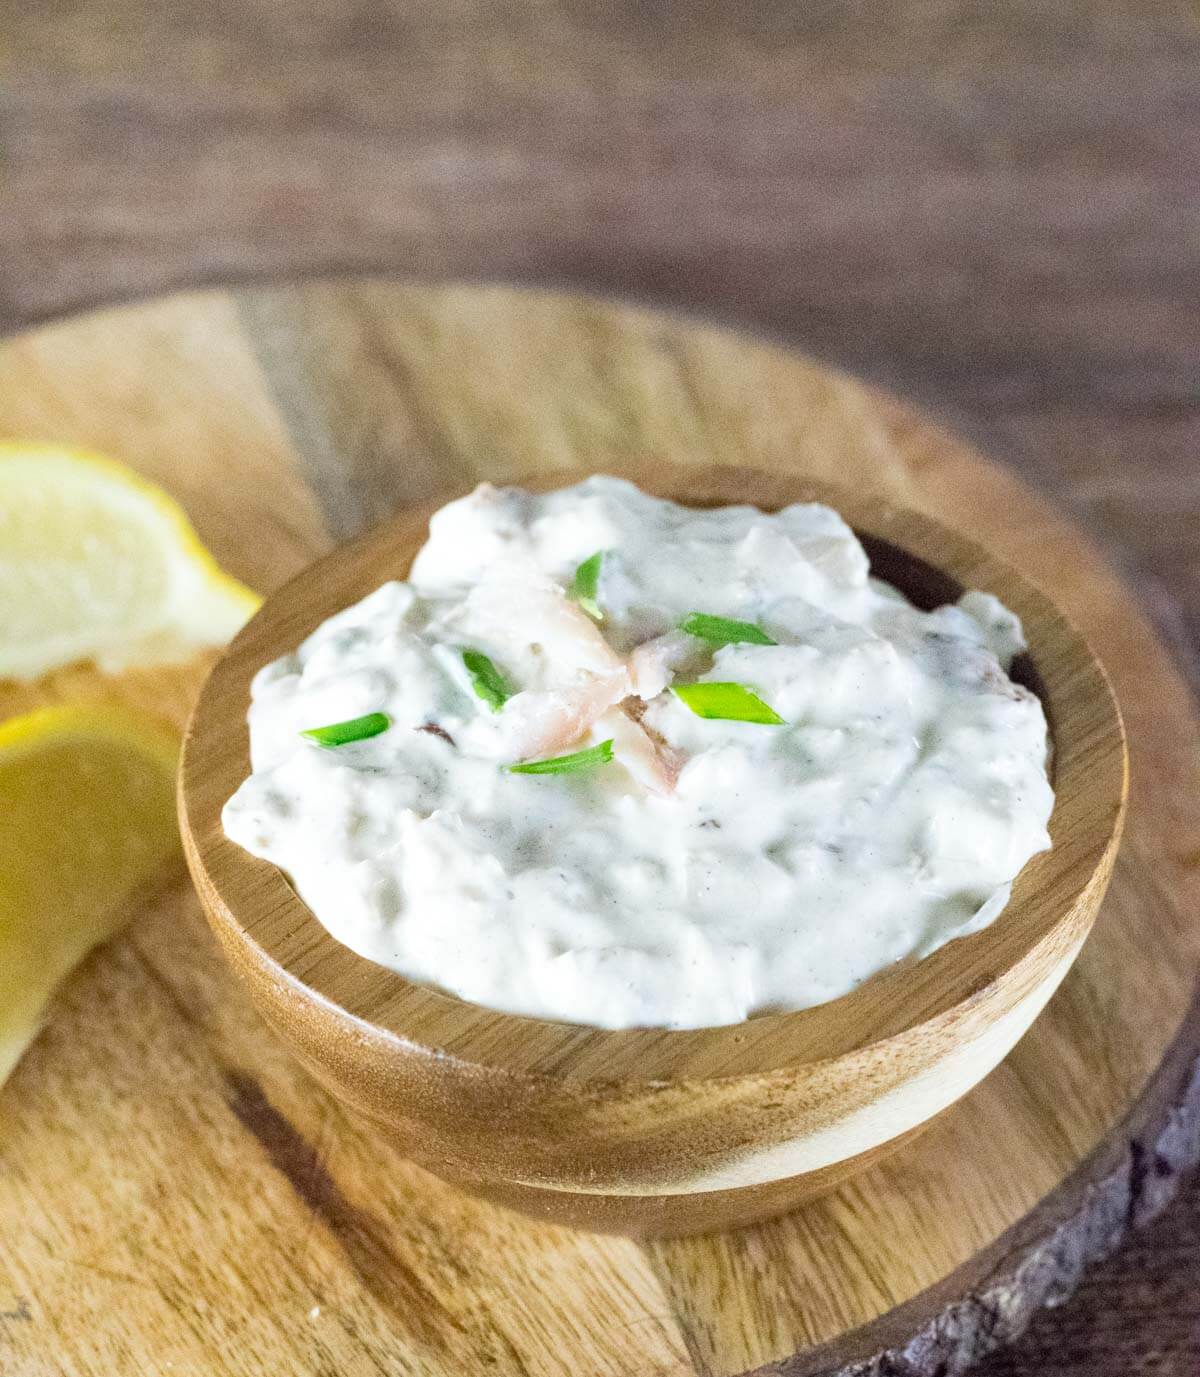 Trout dip with chives on top and lemon wedges shown.